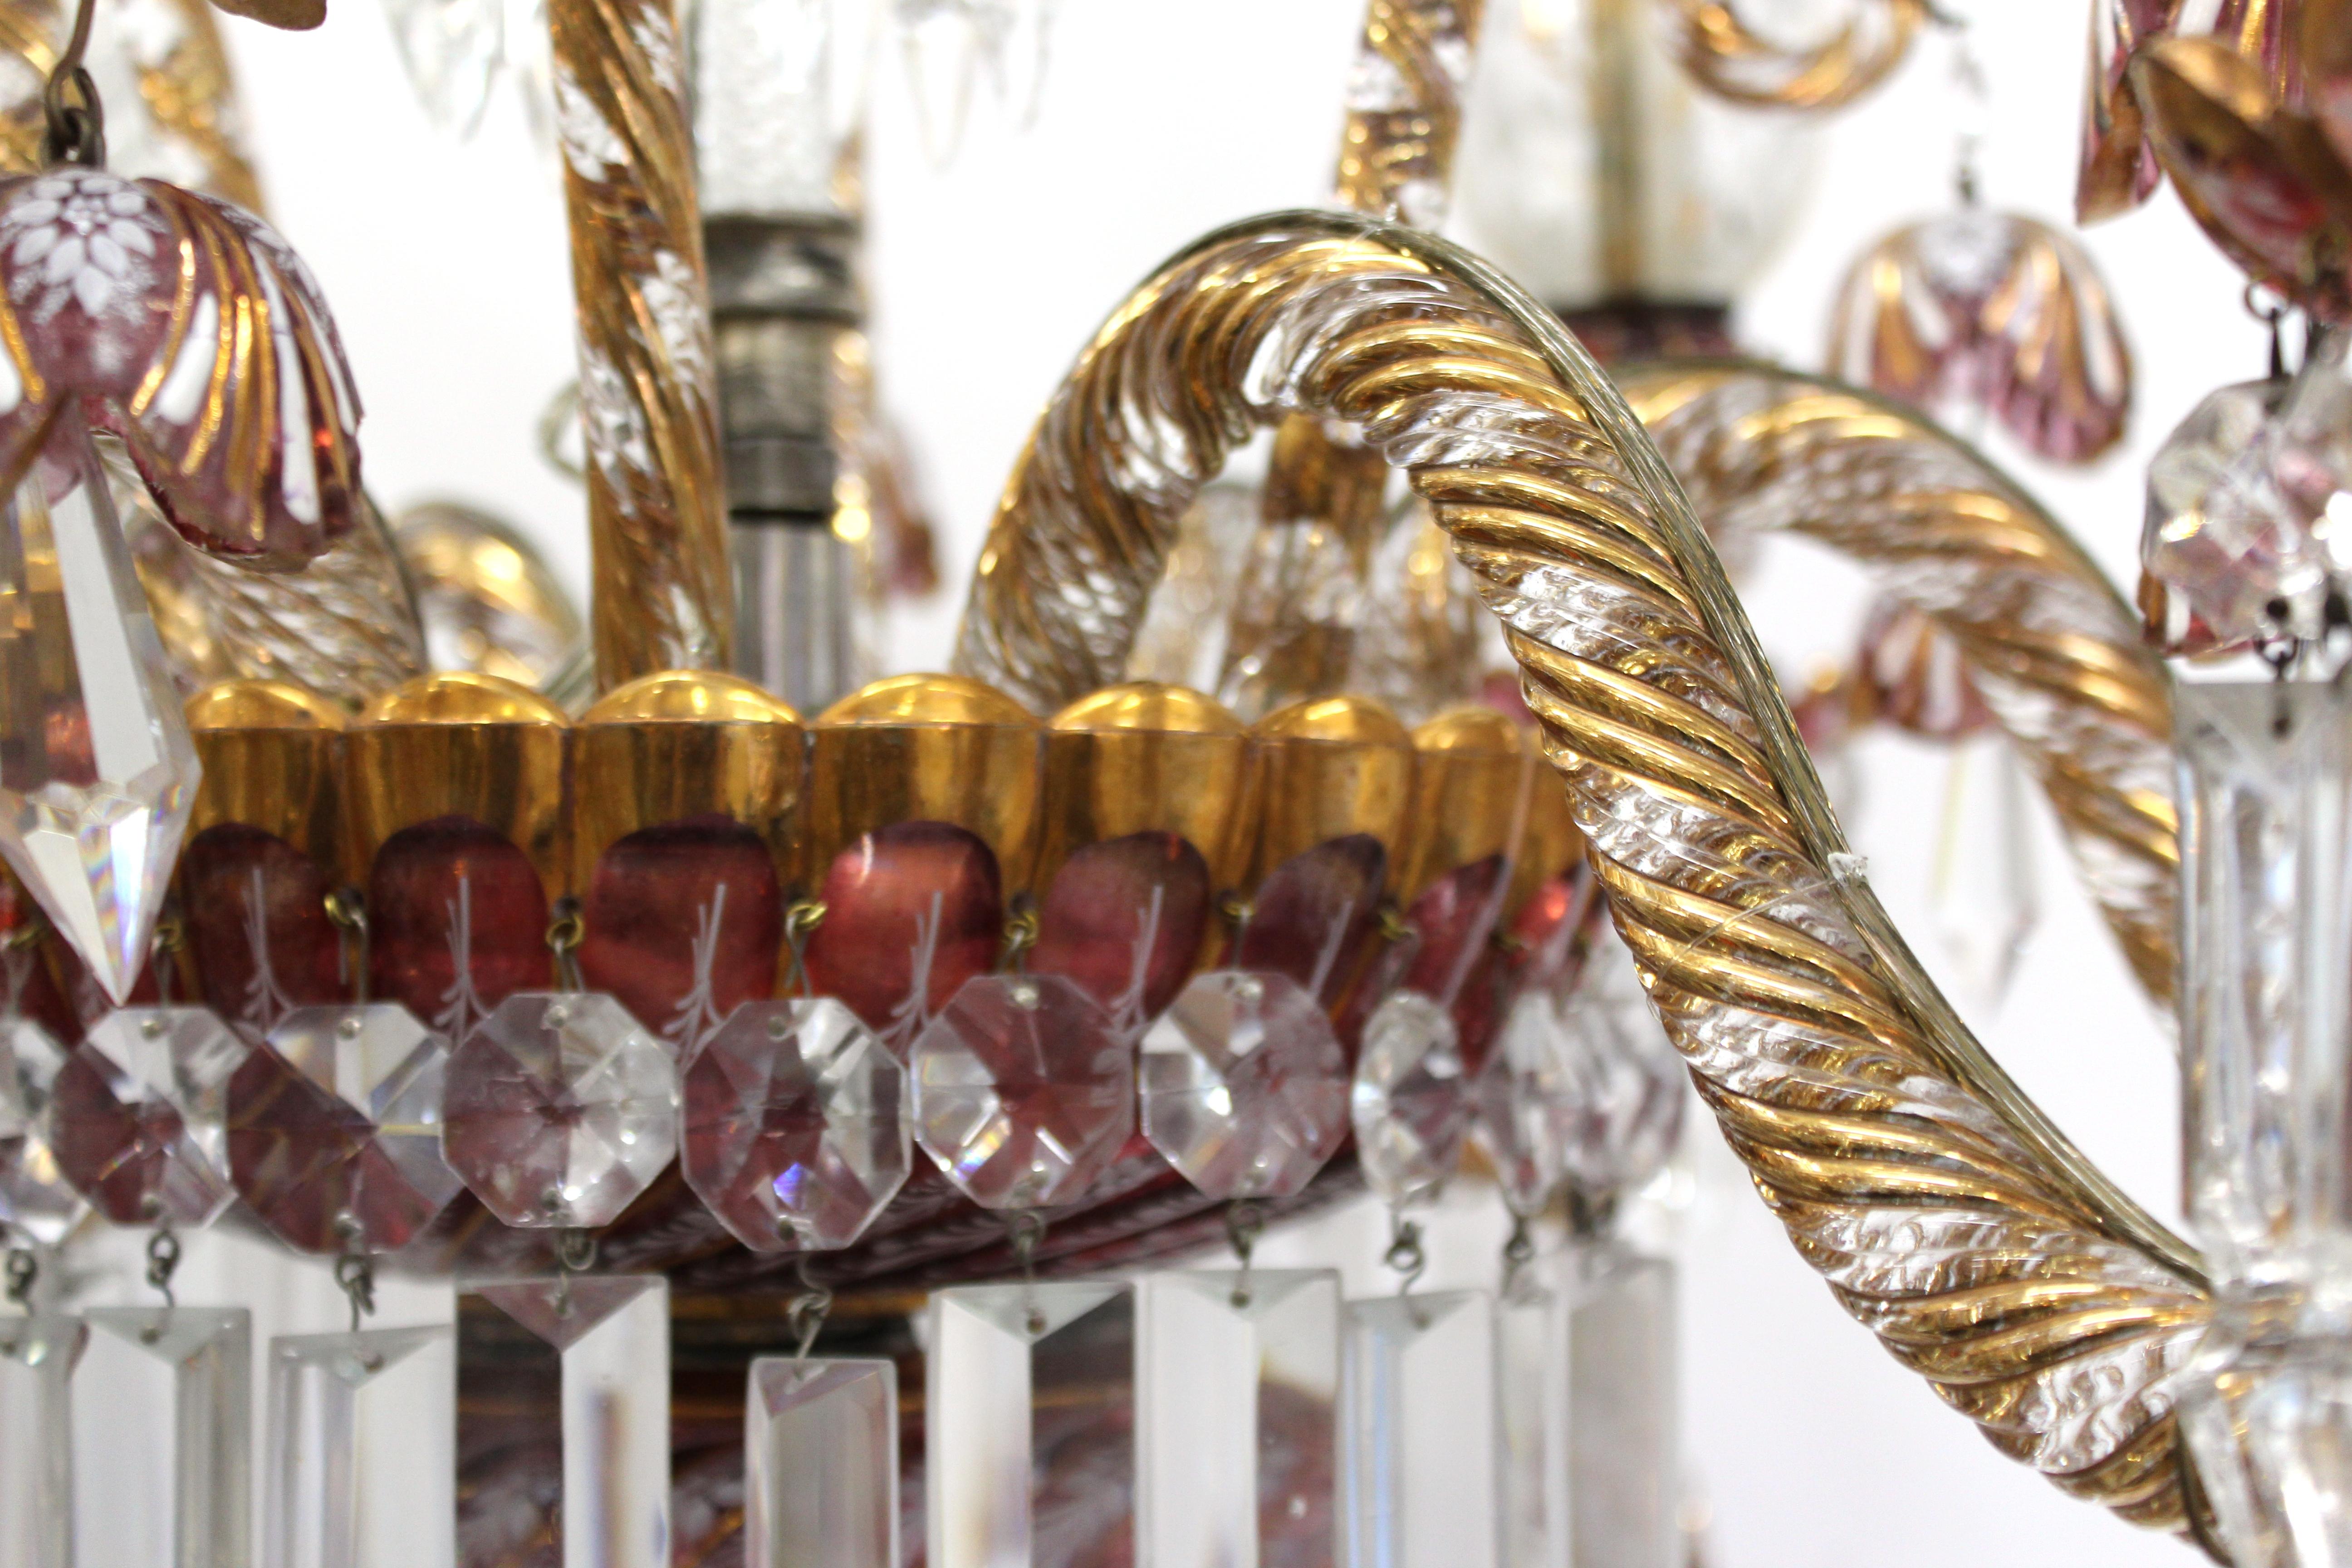 Baccarat Style Ruby & Gold Crystal Torchiere Lamps 14